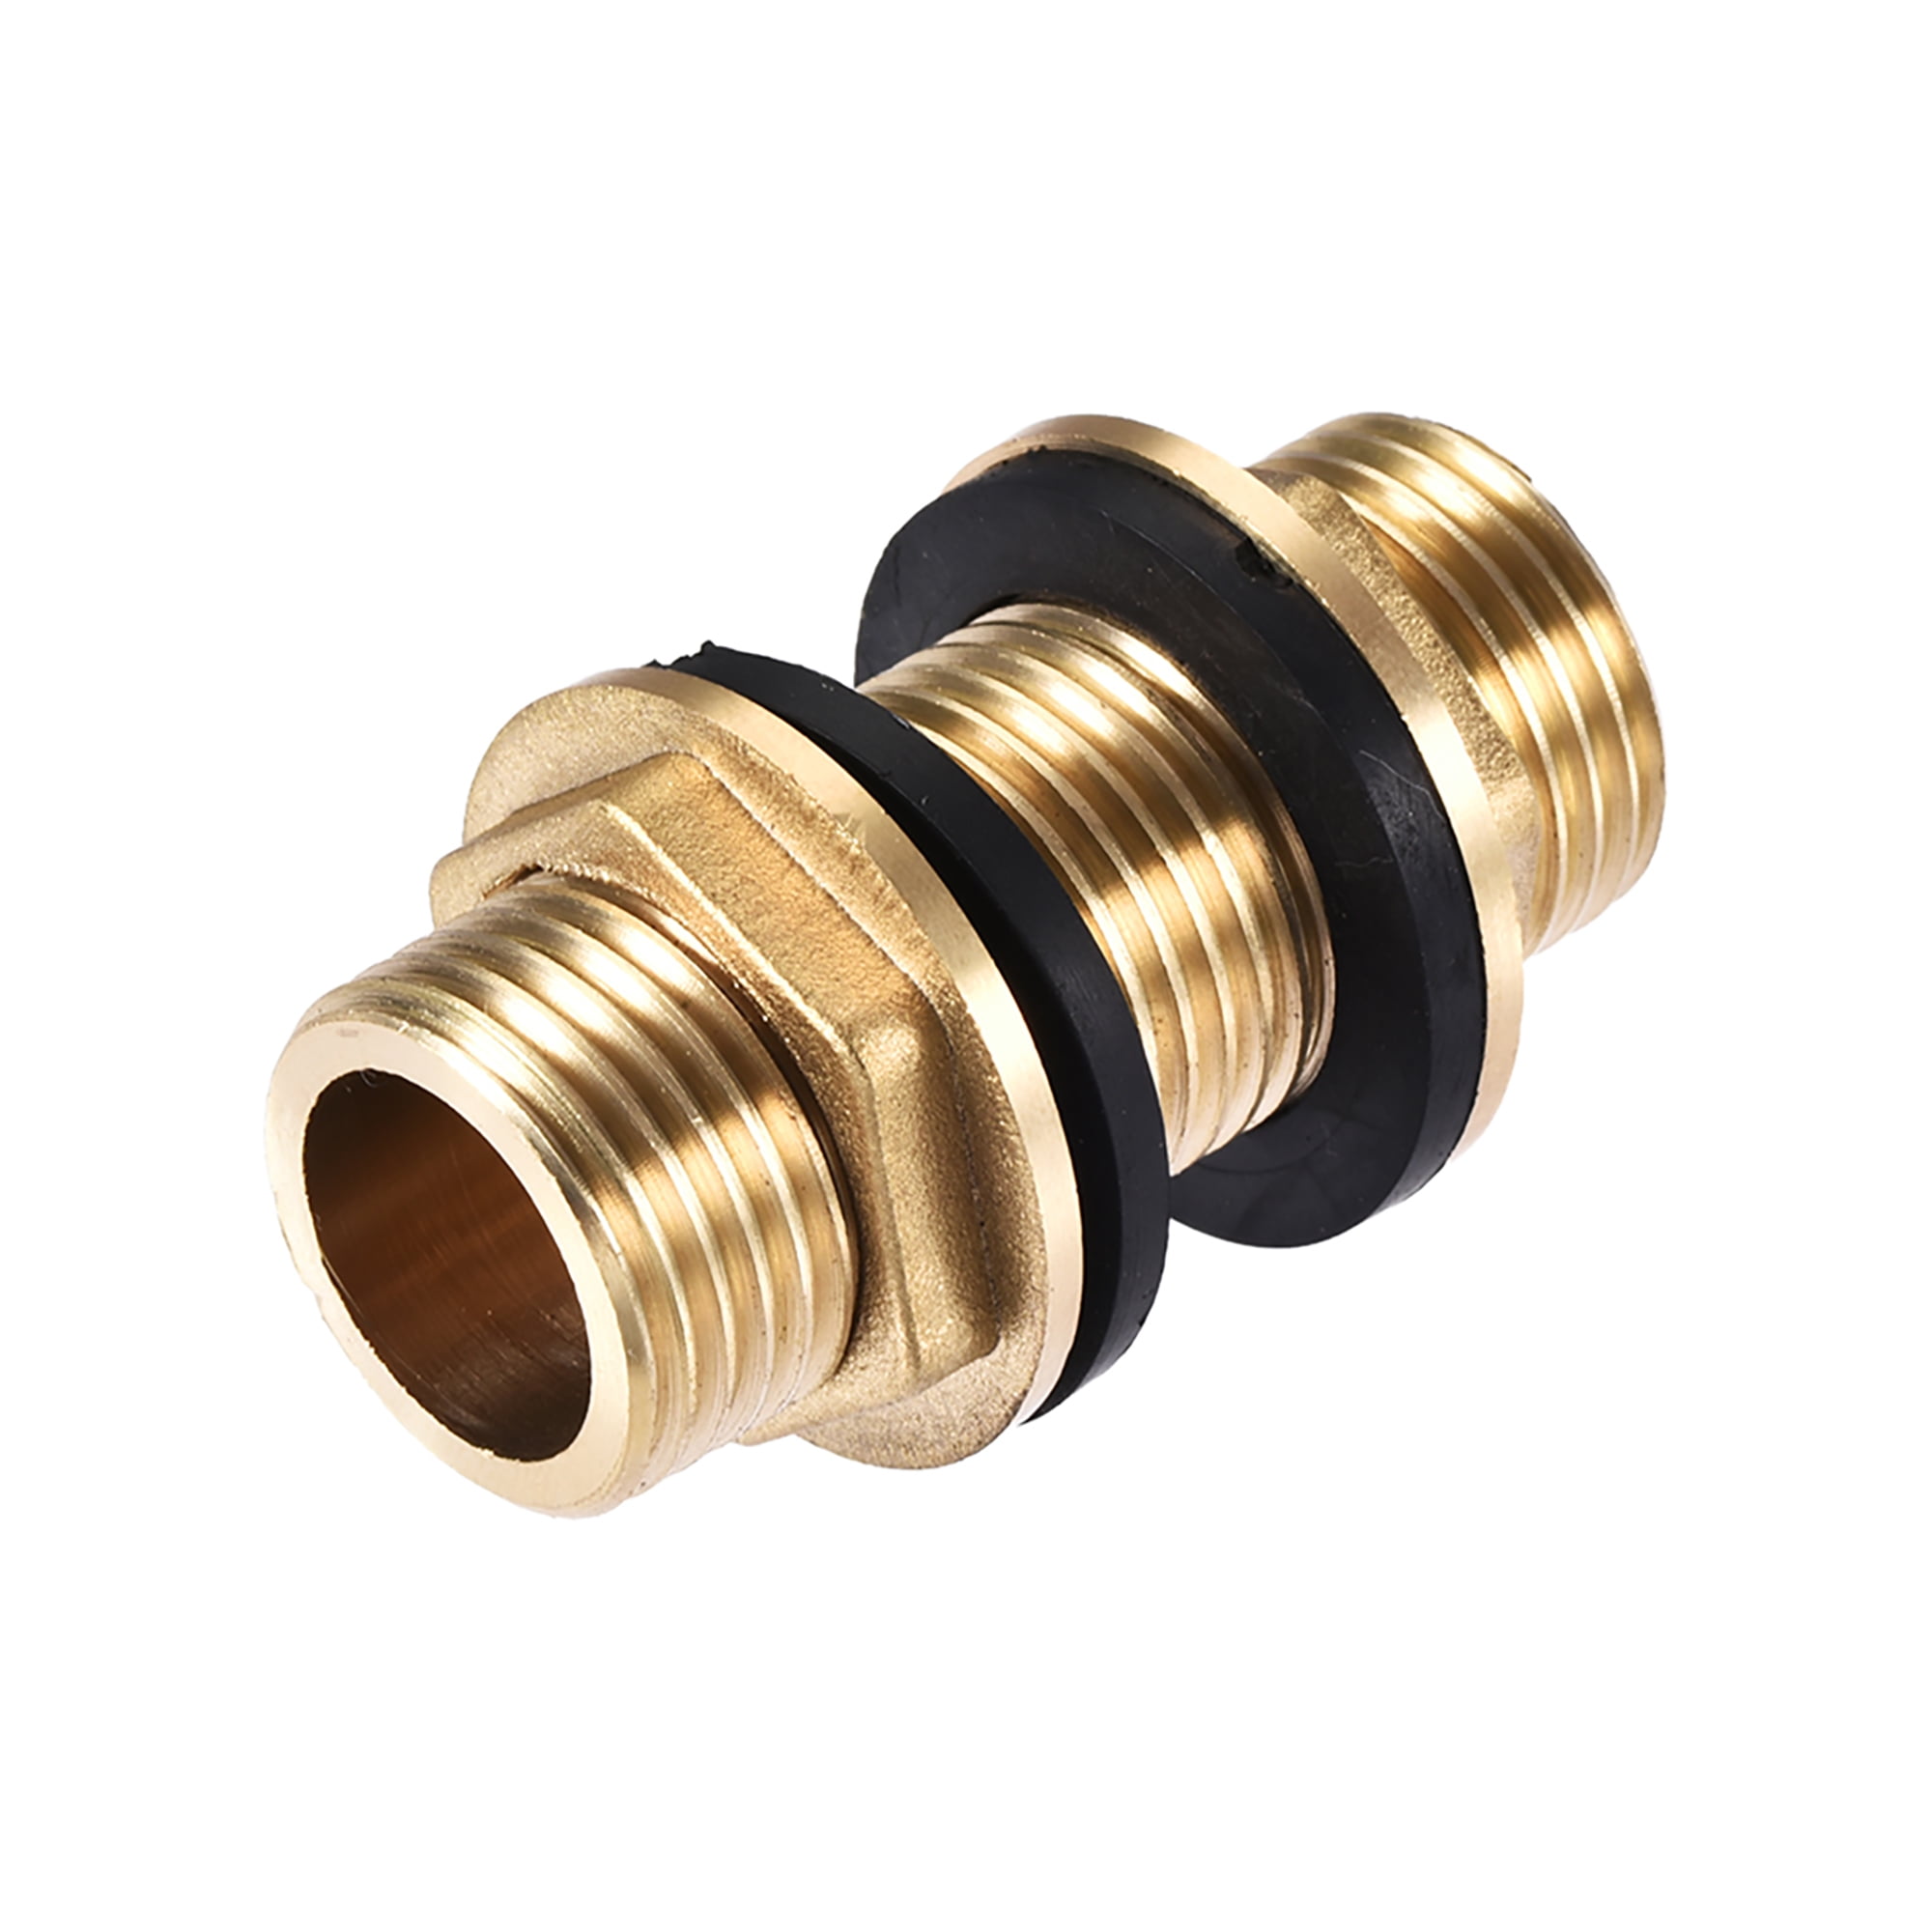 Uxcell 2.5mm Tube Brass Compression Fittings, 15 Pack Insert Compression  Sleeve Fitting 